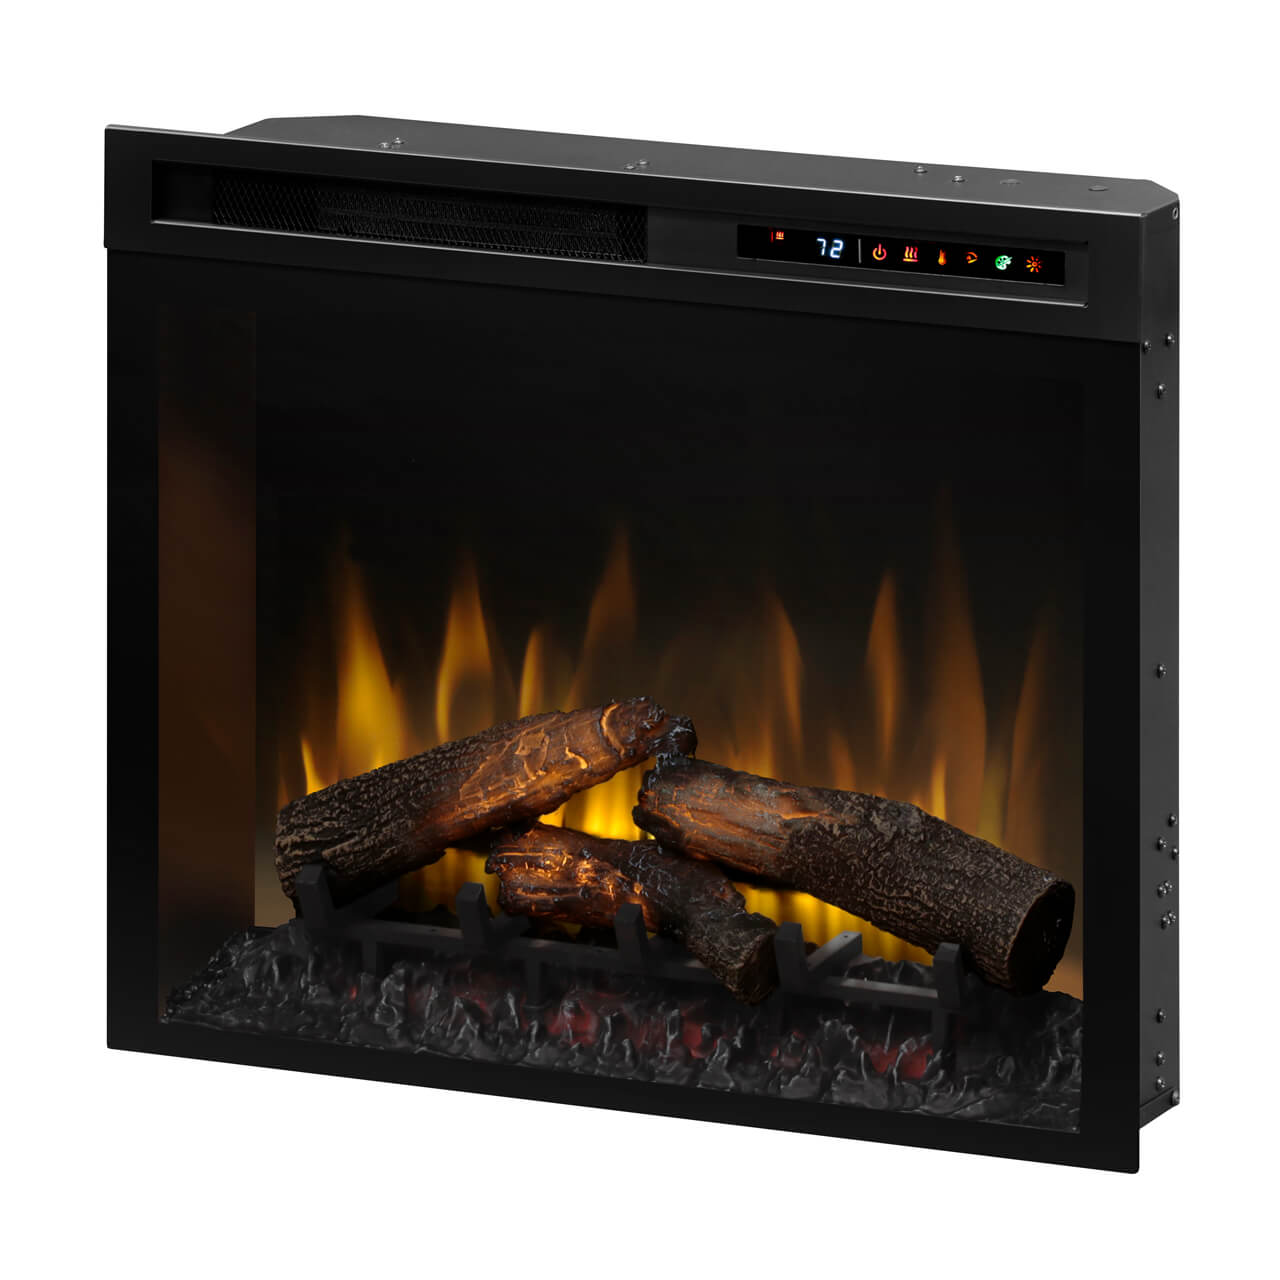 Dimplex MULTI-FIRE XHD28 28" Front Mount Electric Firebox Fireplace